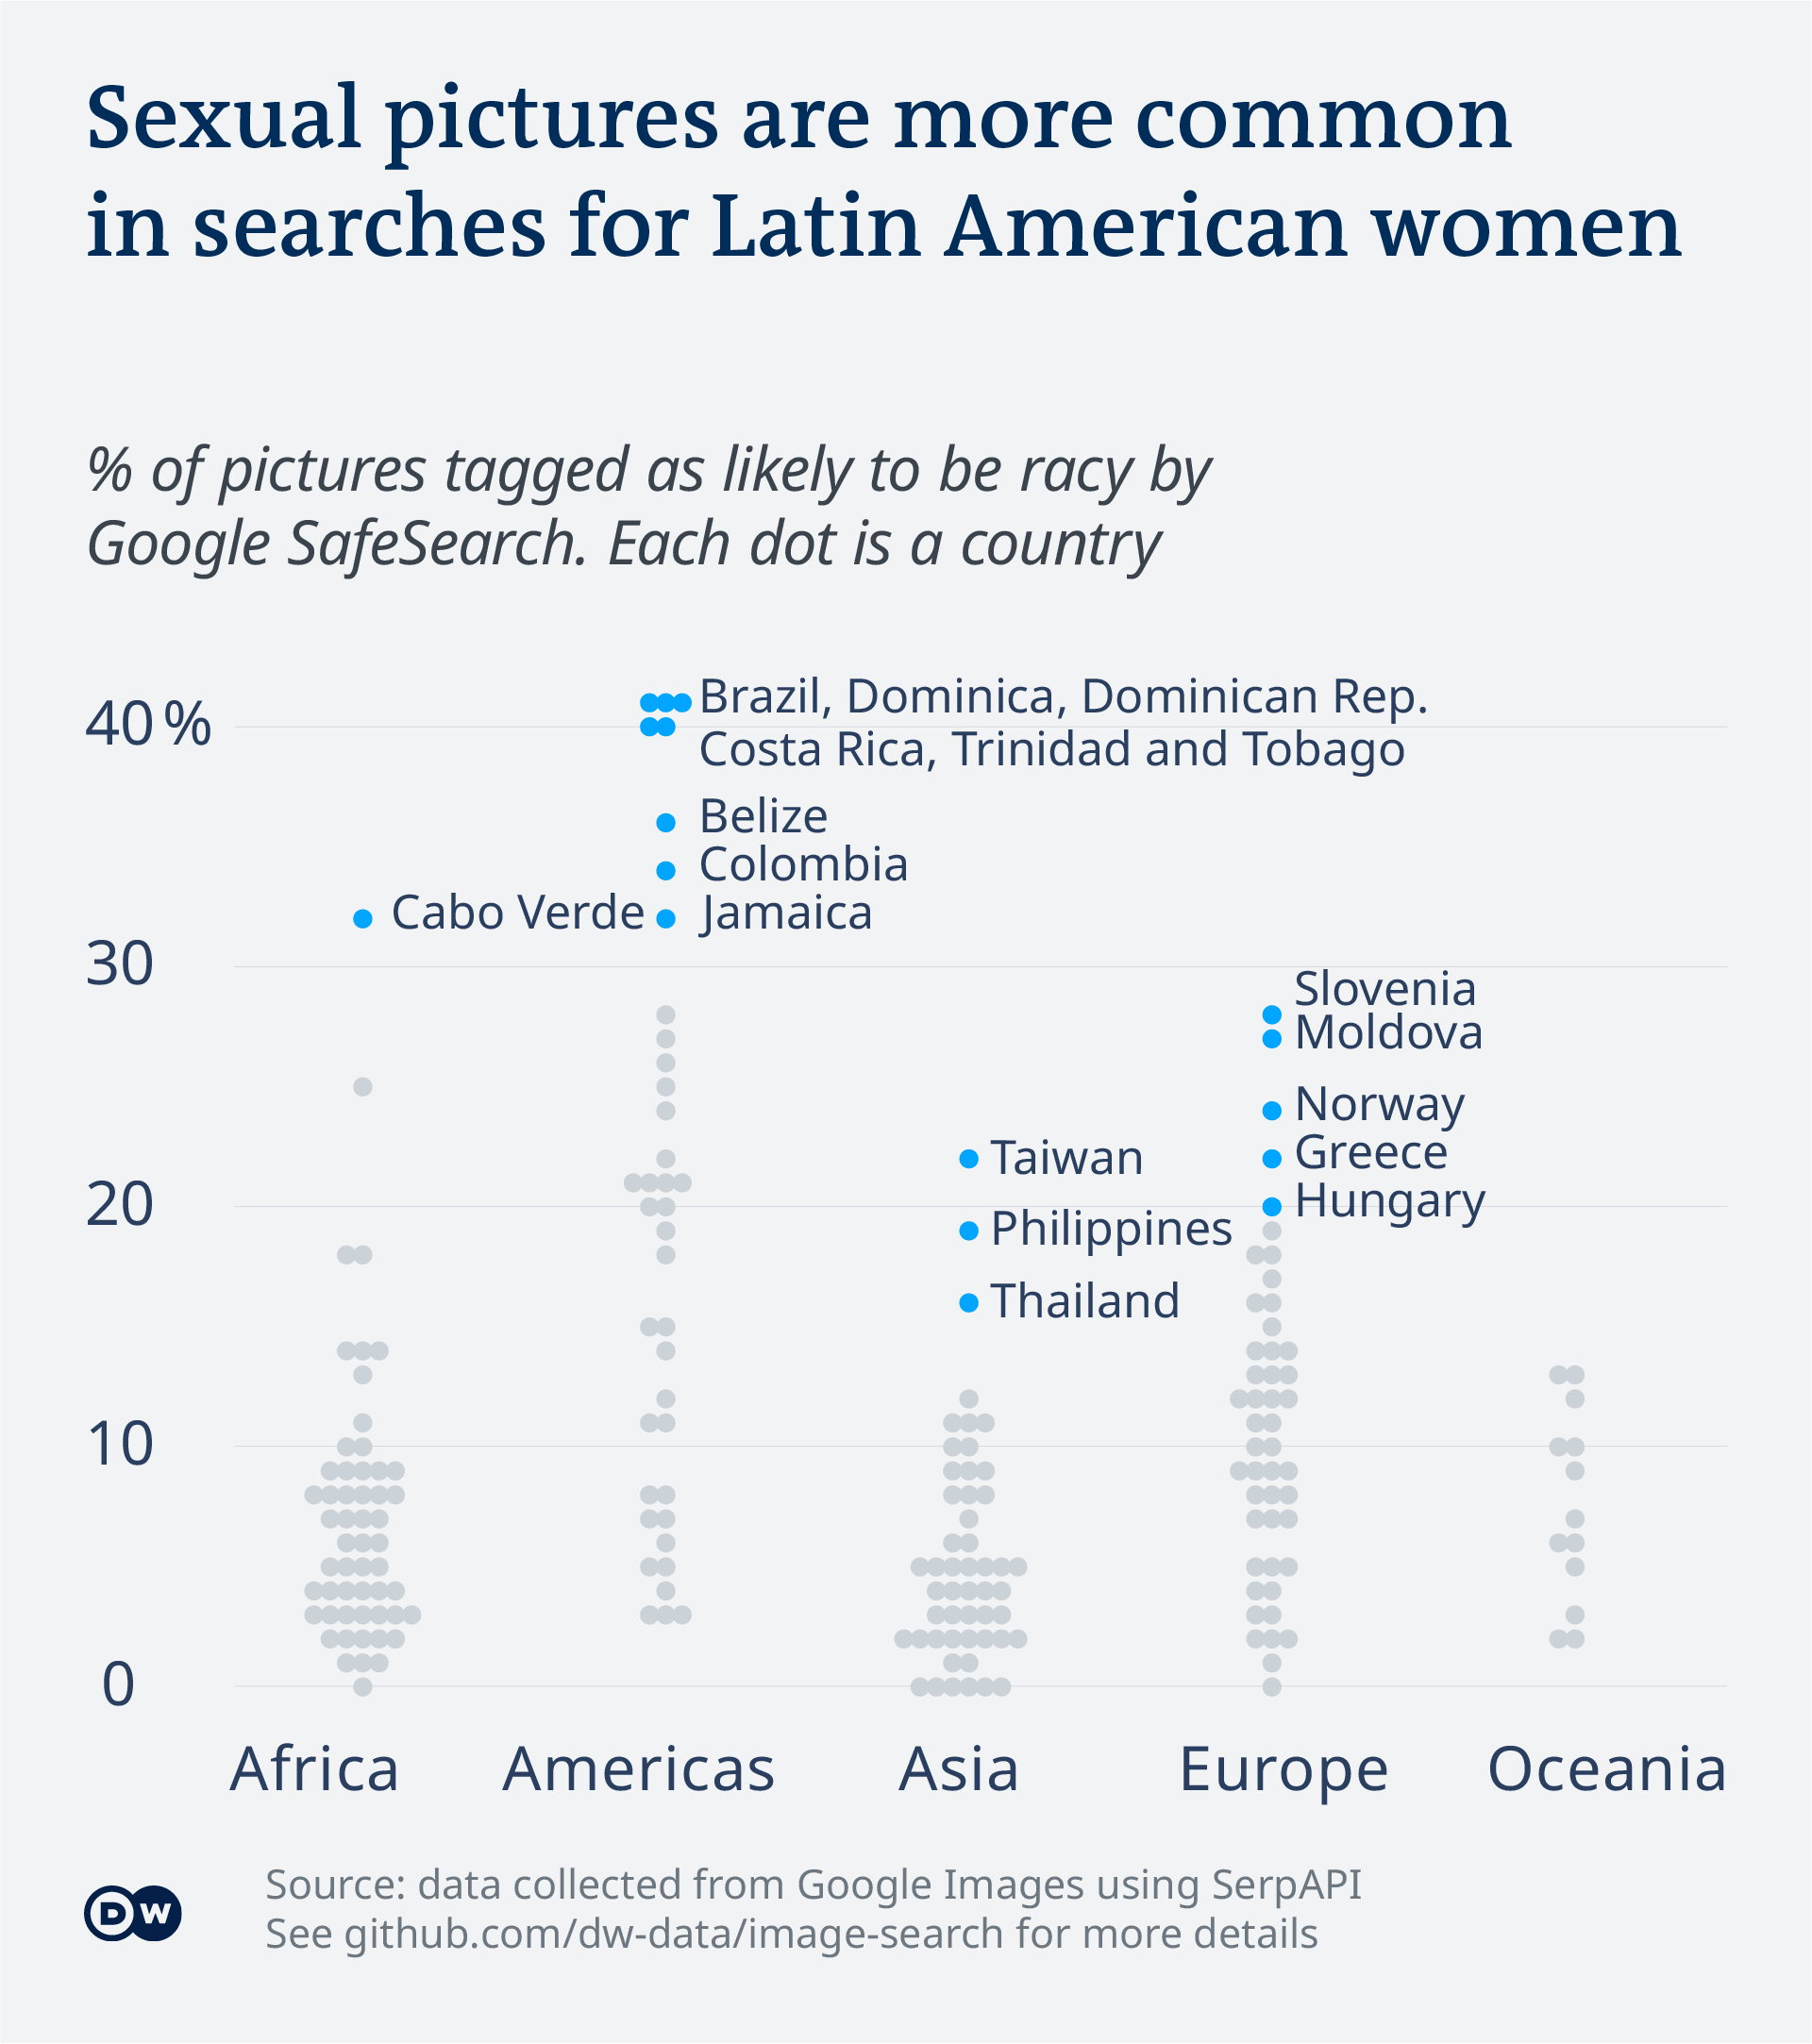 Data visualization - Google image search - Rate of 'racy' pictures in different regions